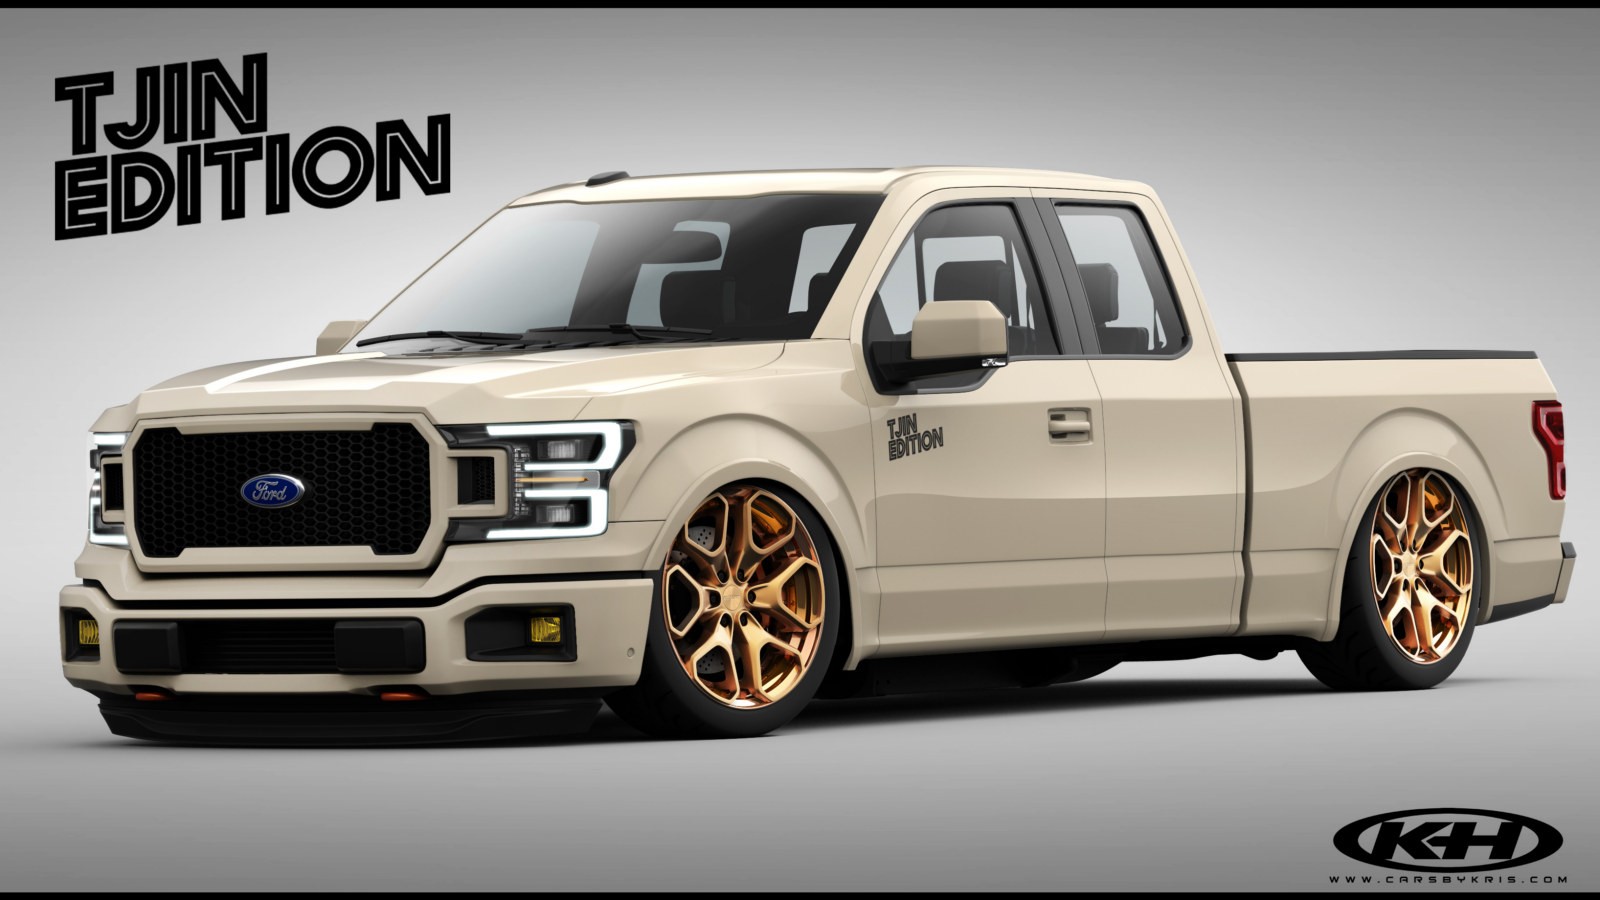 2018 Ford F-150 XLT SuperCrew created by Tjin Edition